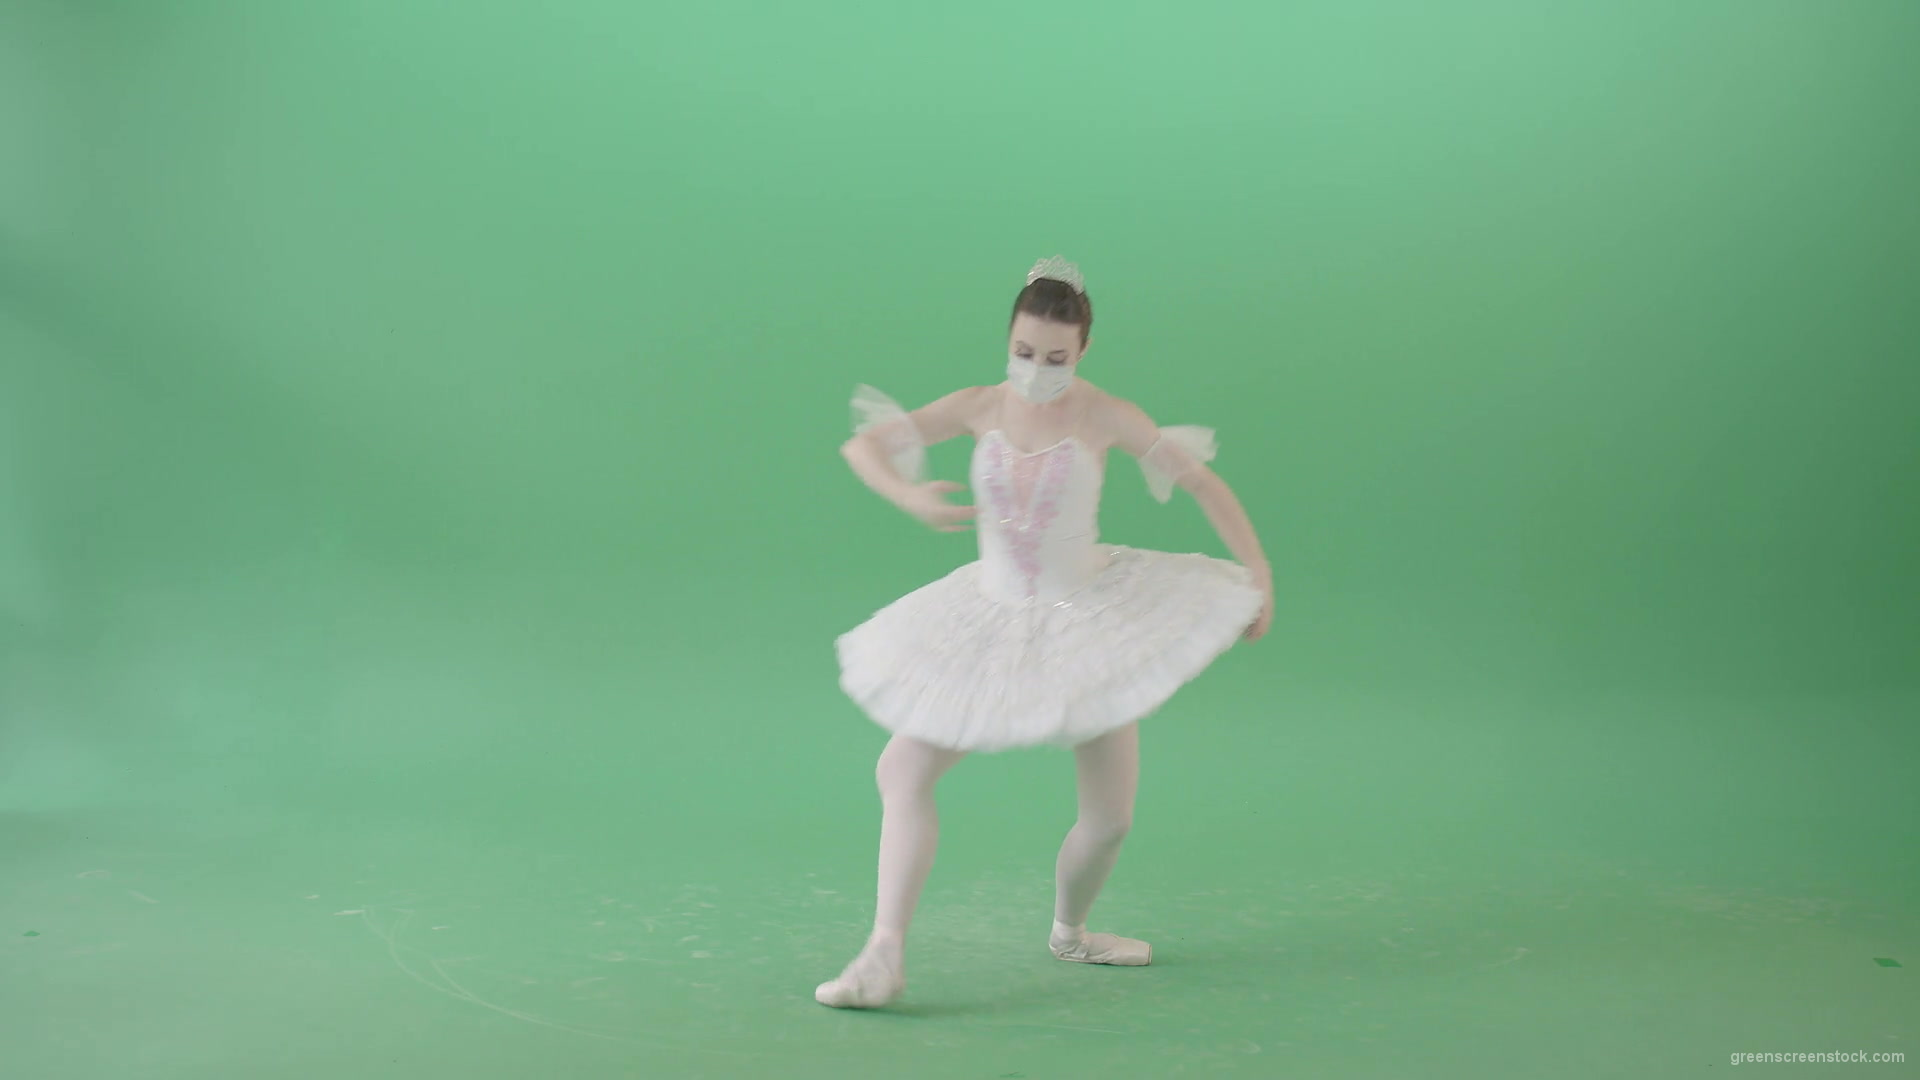 Amazing-Flowing-dance-by-Ballerina-ballet-girl-looking-for-Corona-Virus-isolated-on-Green-Screen-Viral-4K-Video-Footage-1920_009 Green Screen Stock